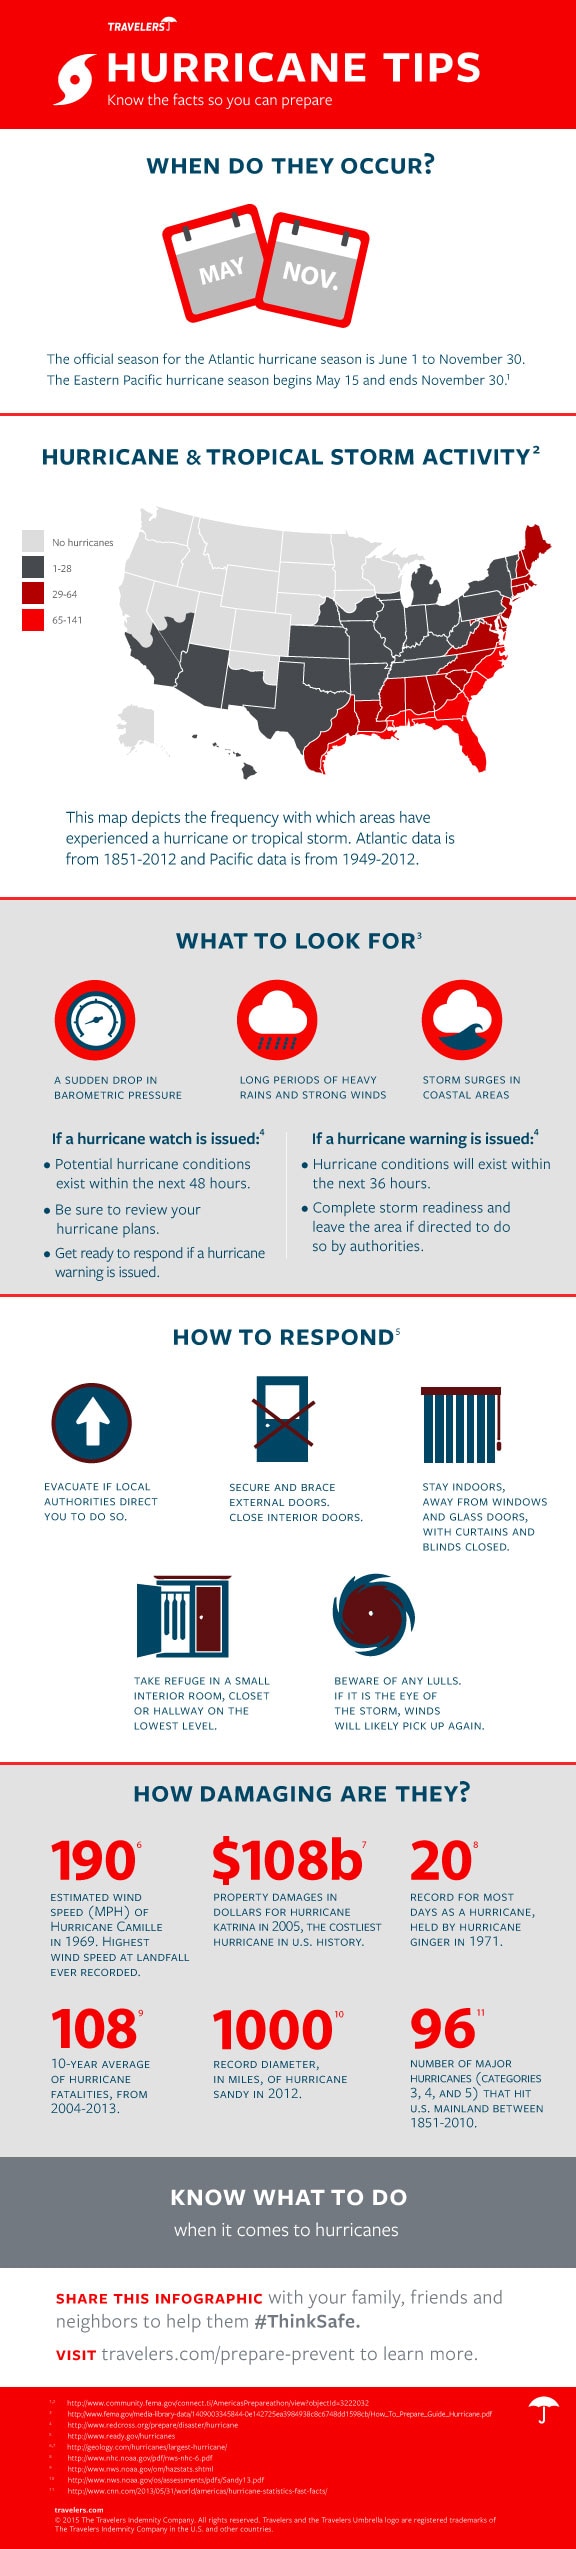 Hurricane safety tips infographic